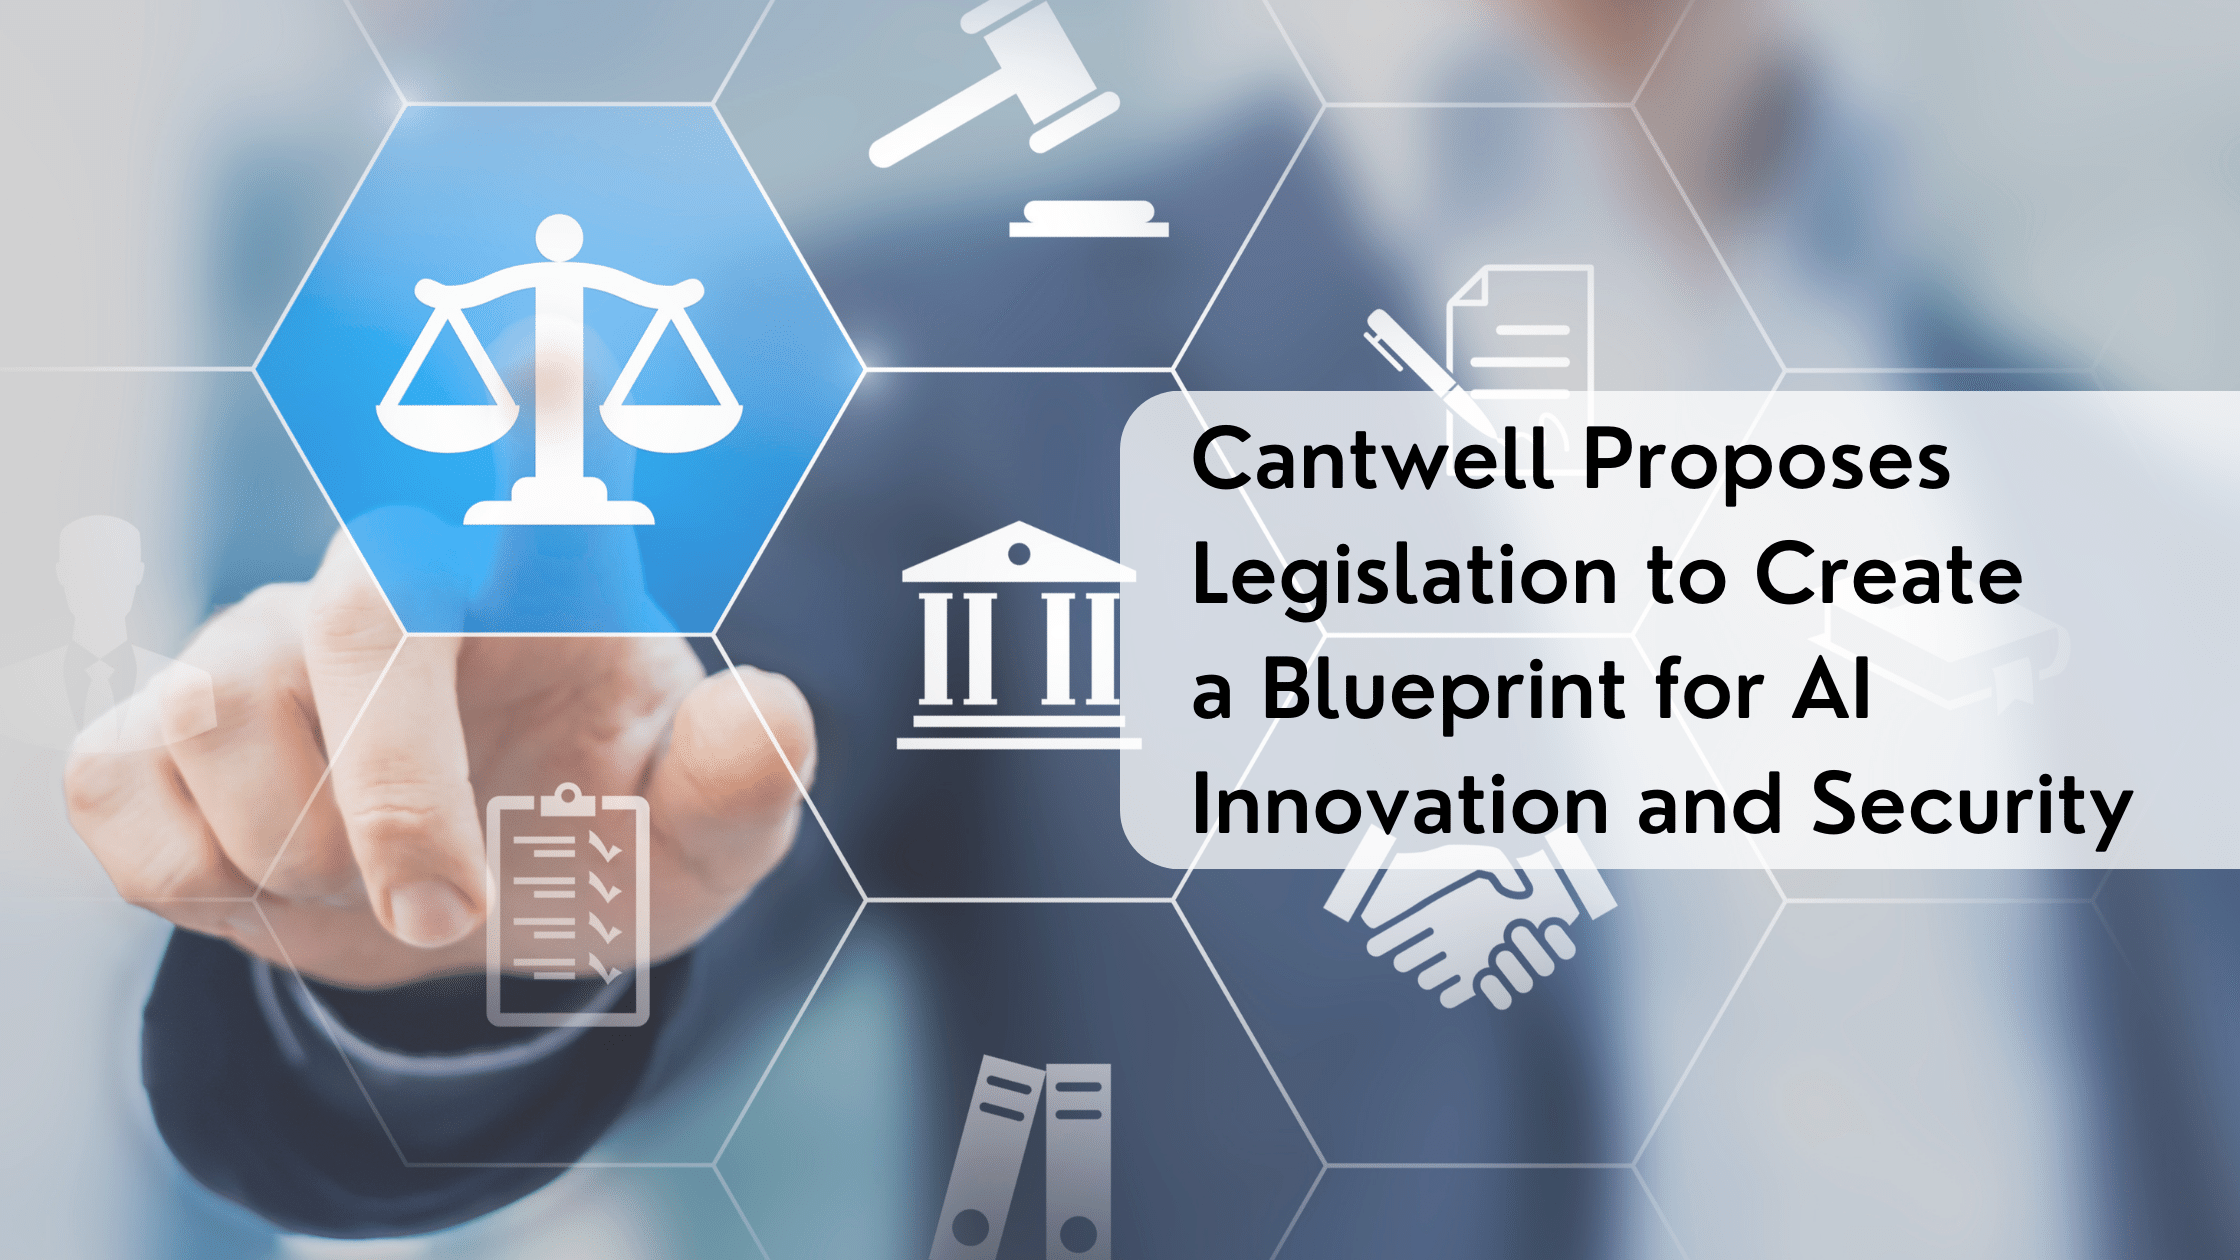 Cantwell Proposes AI Legislation to Create a Blueprint for Innovation and Security